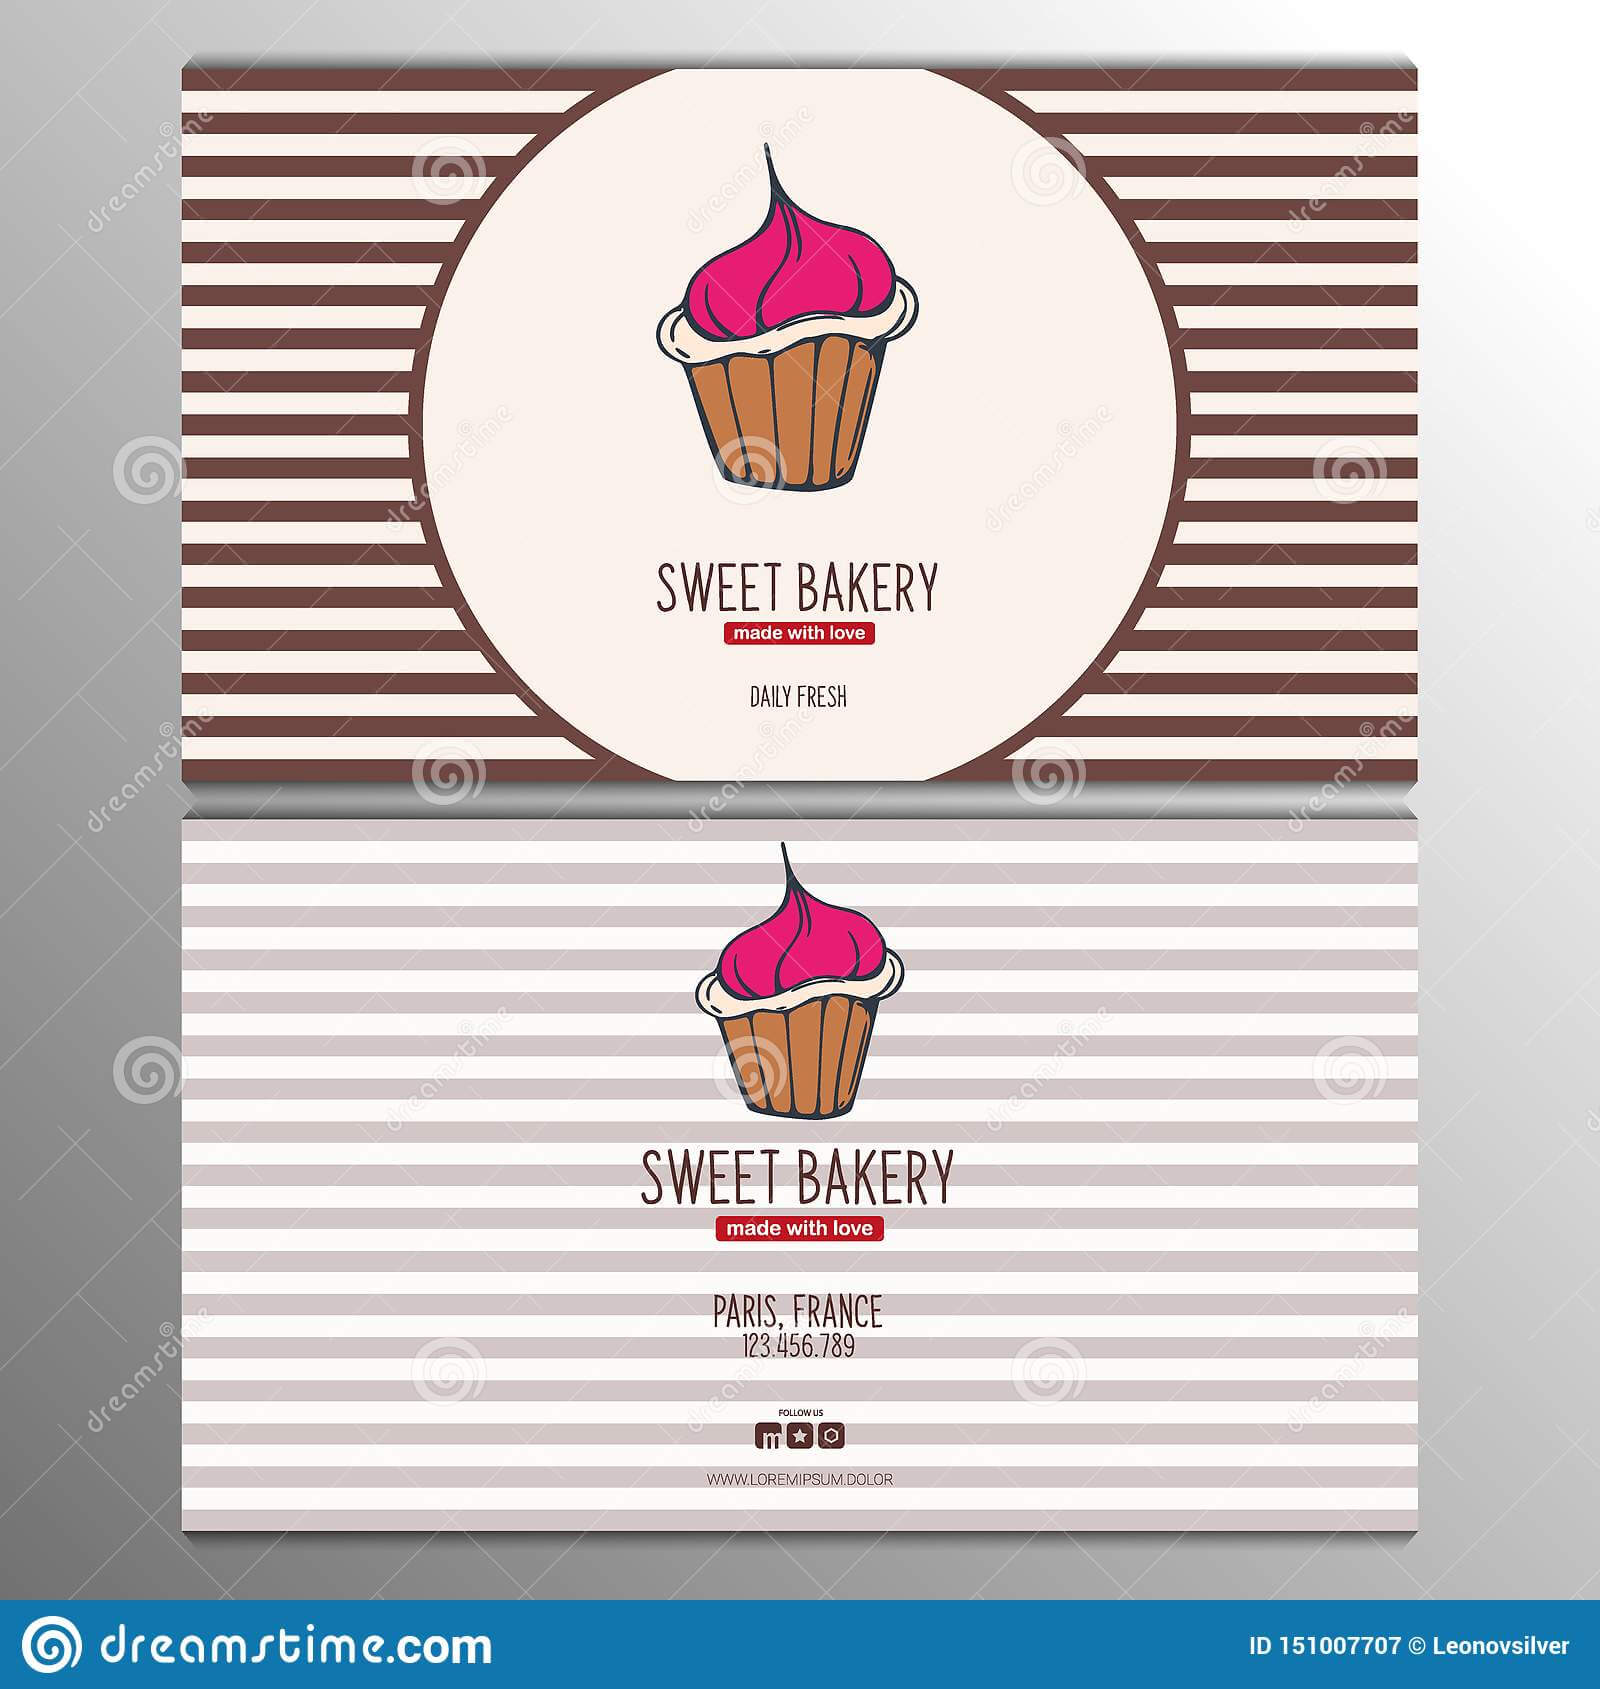 Cupcake Or Cake Business Card Template For Bakery Or Pastry Pertaining To Cake Business Cards Templates Free